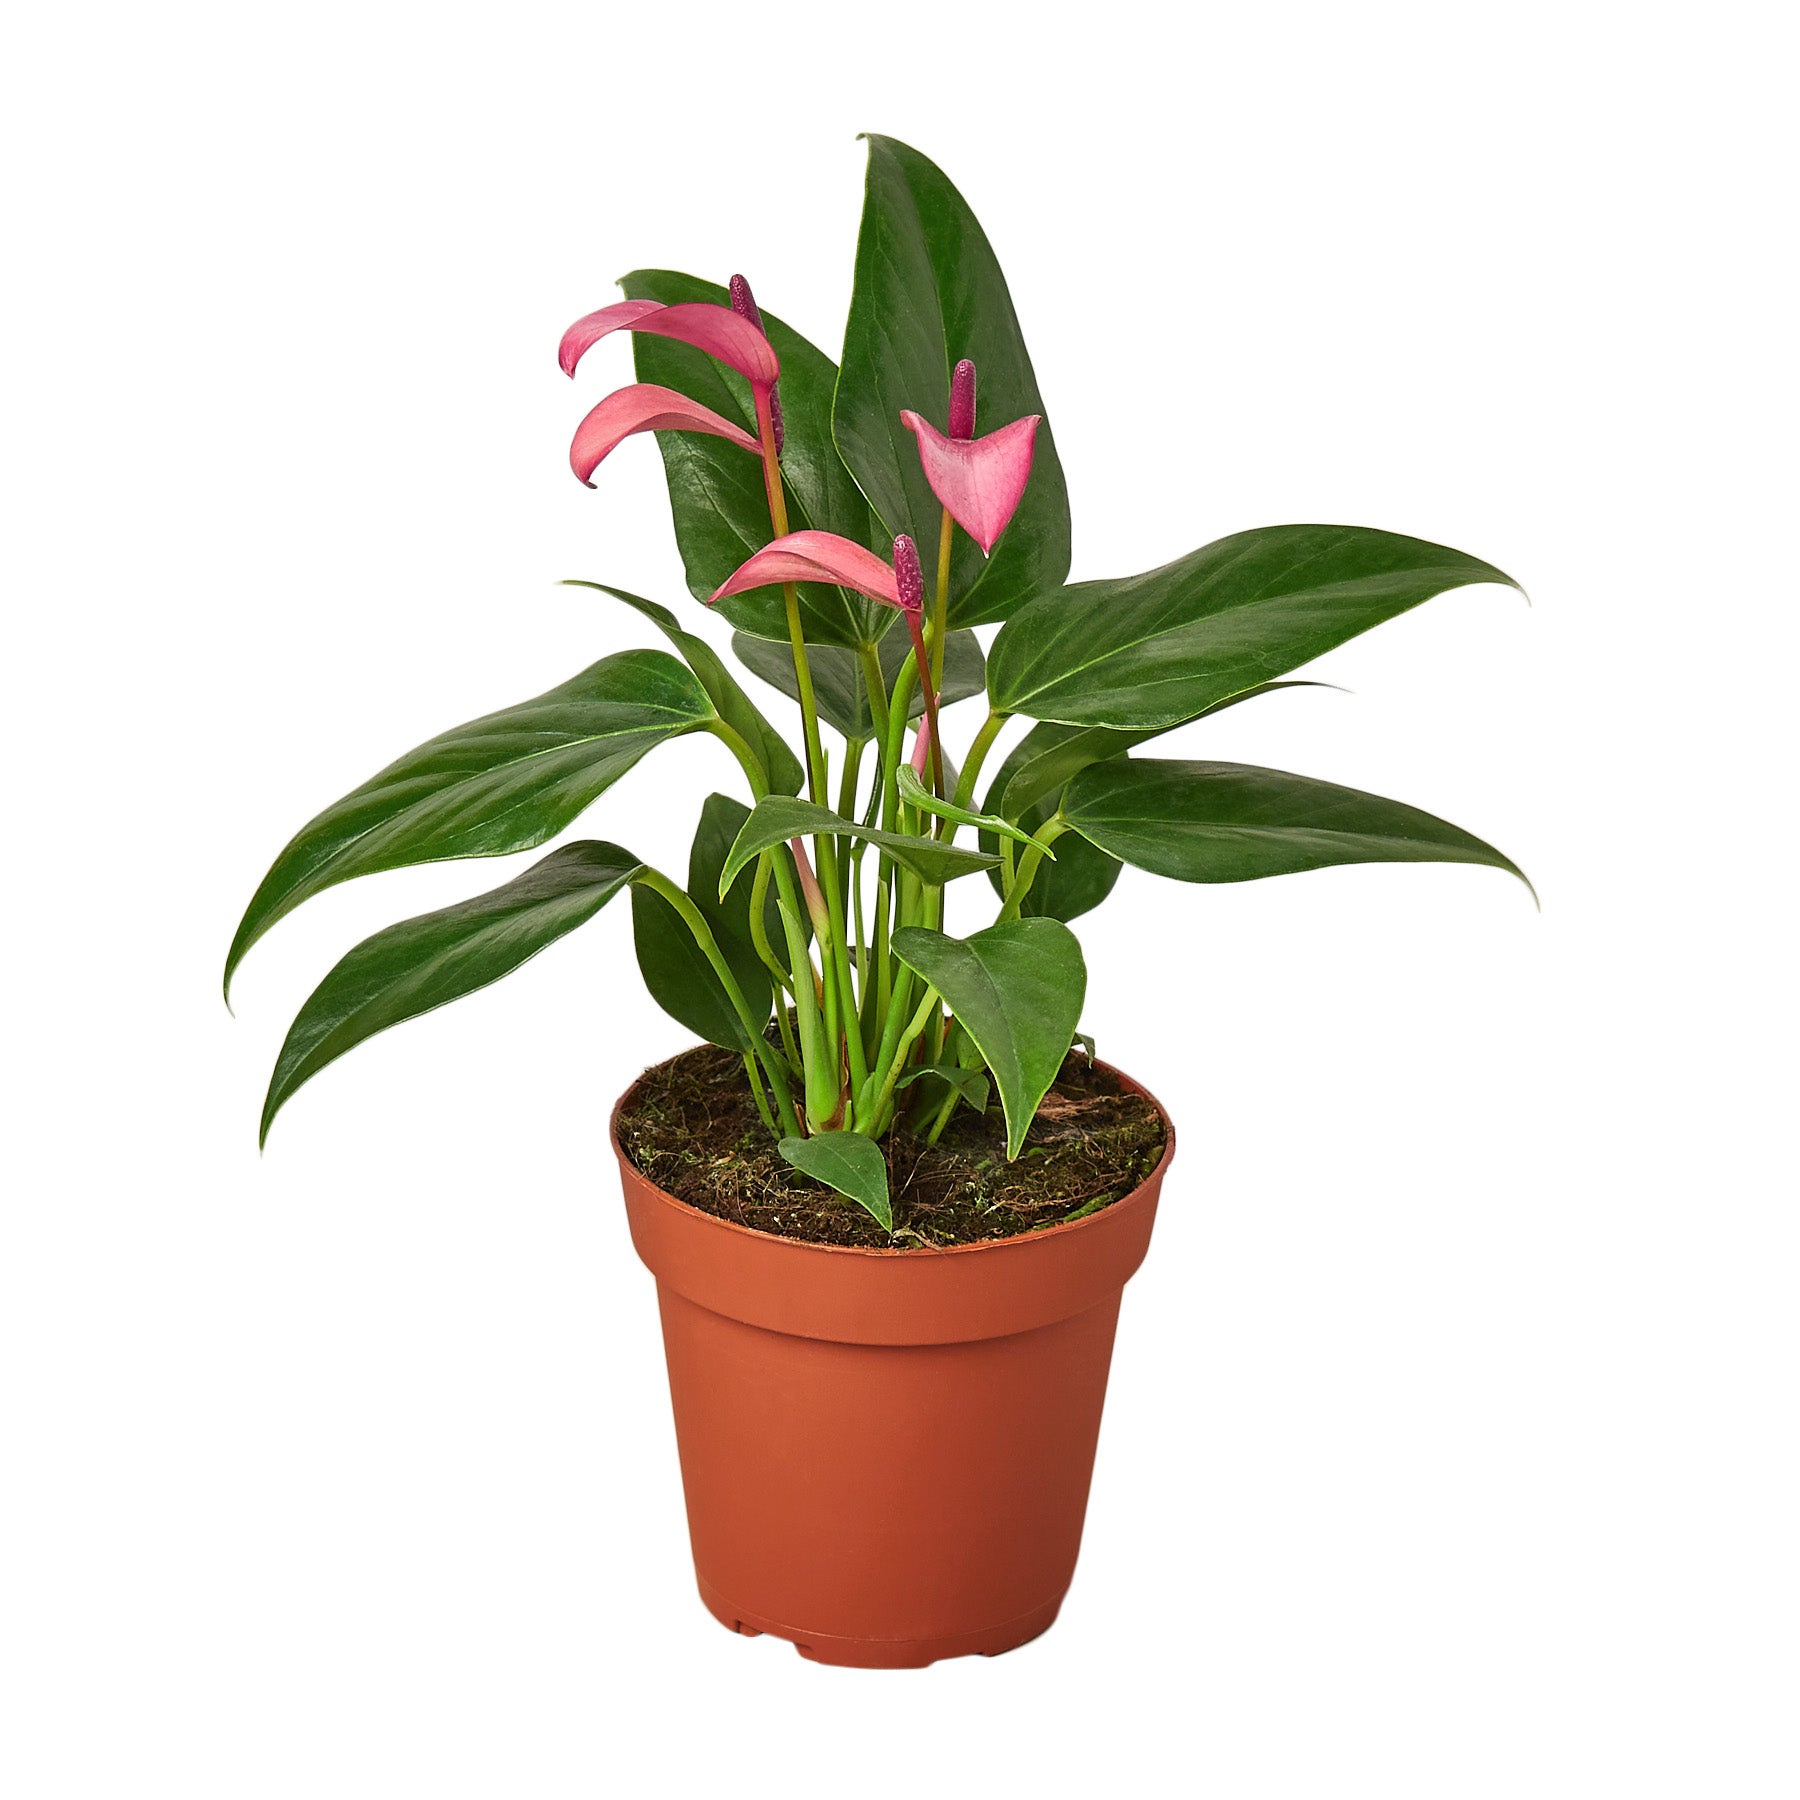 A pink plant in a pot on a white background, available at the best garden nursery near me.